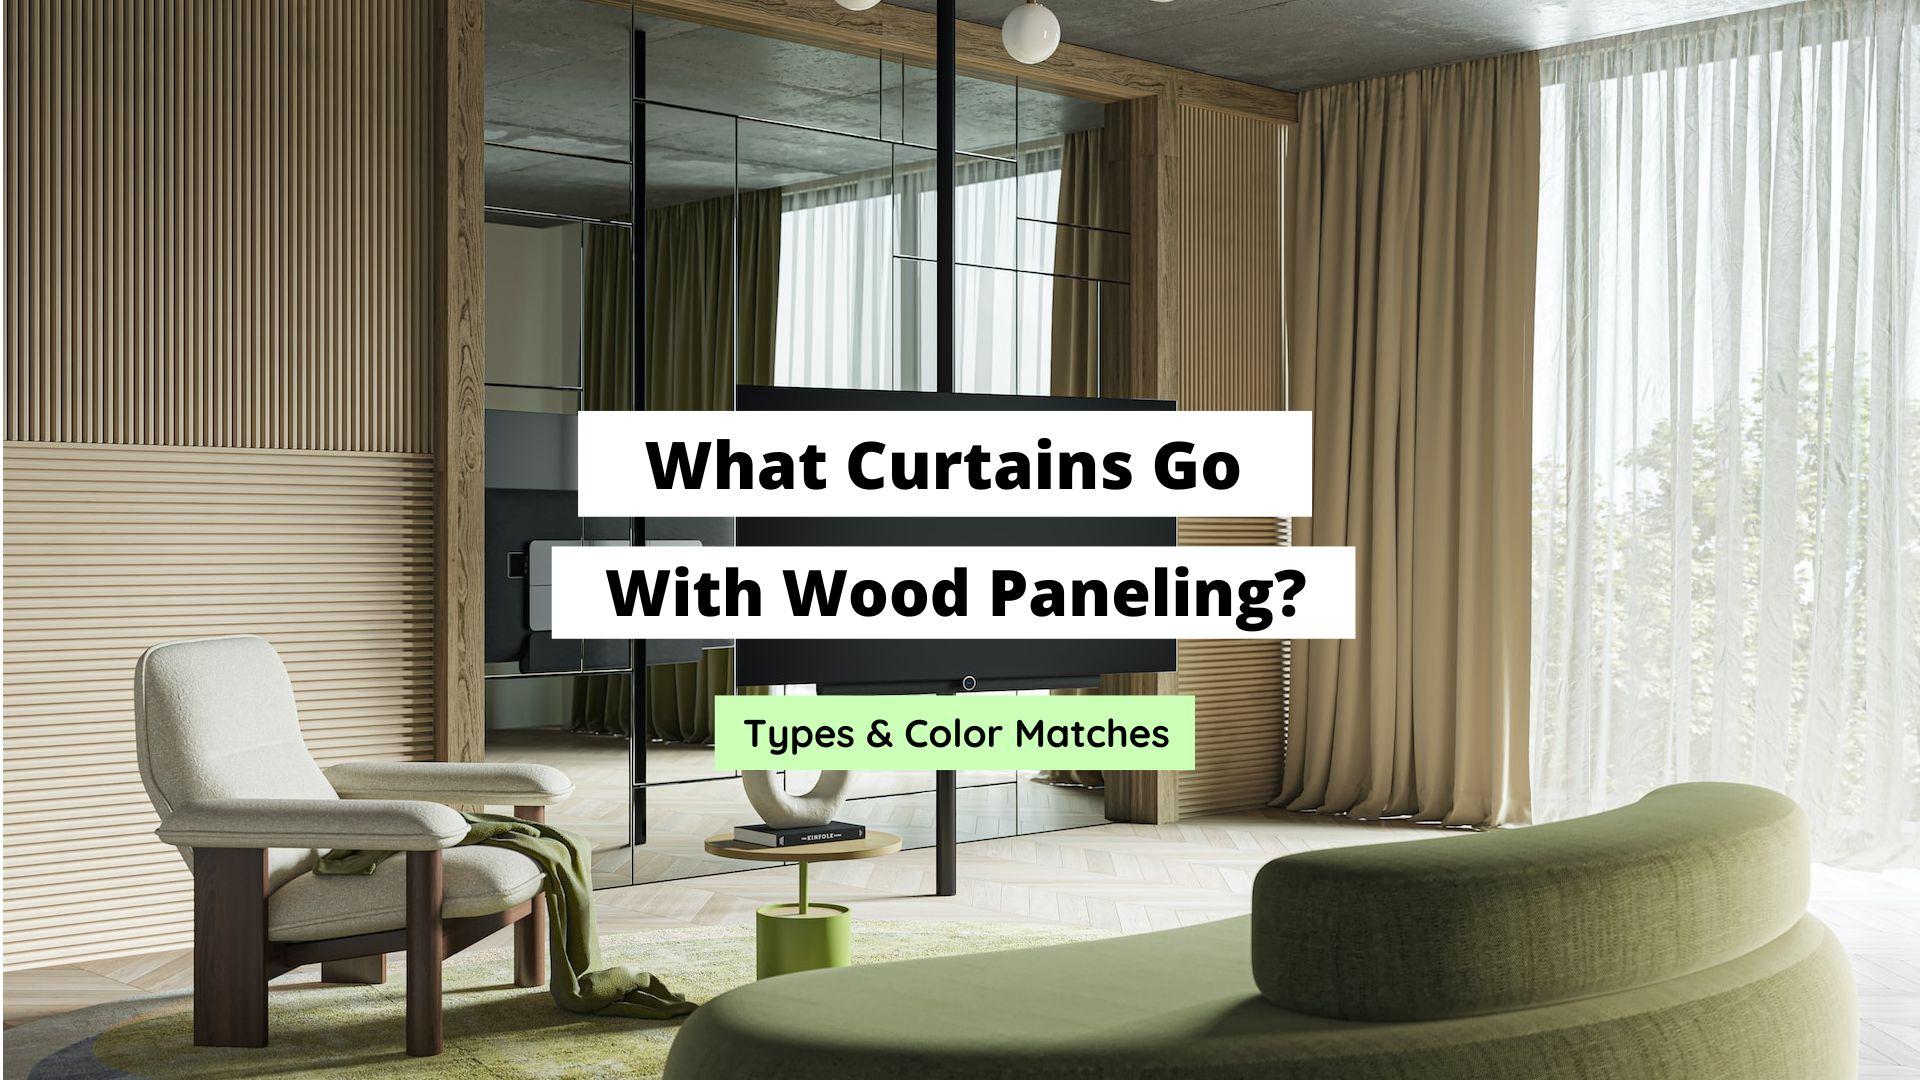 What Curtains Go With Wood Paneling